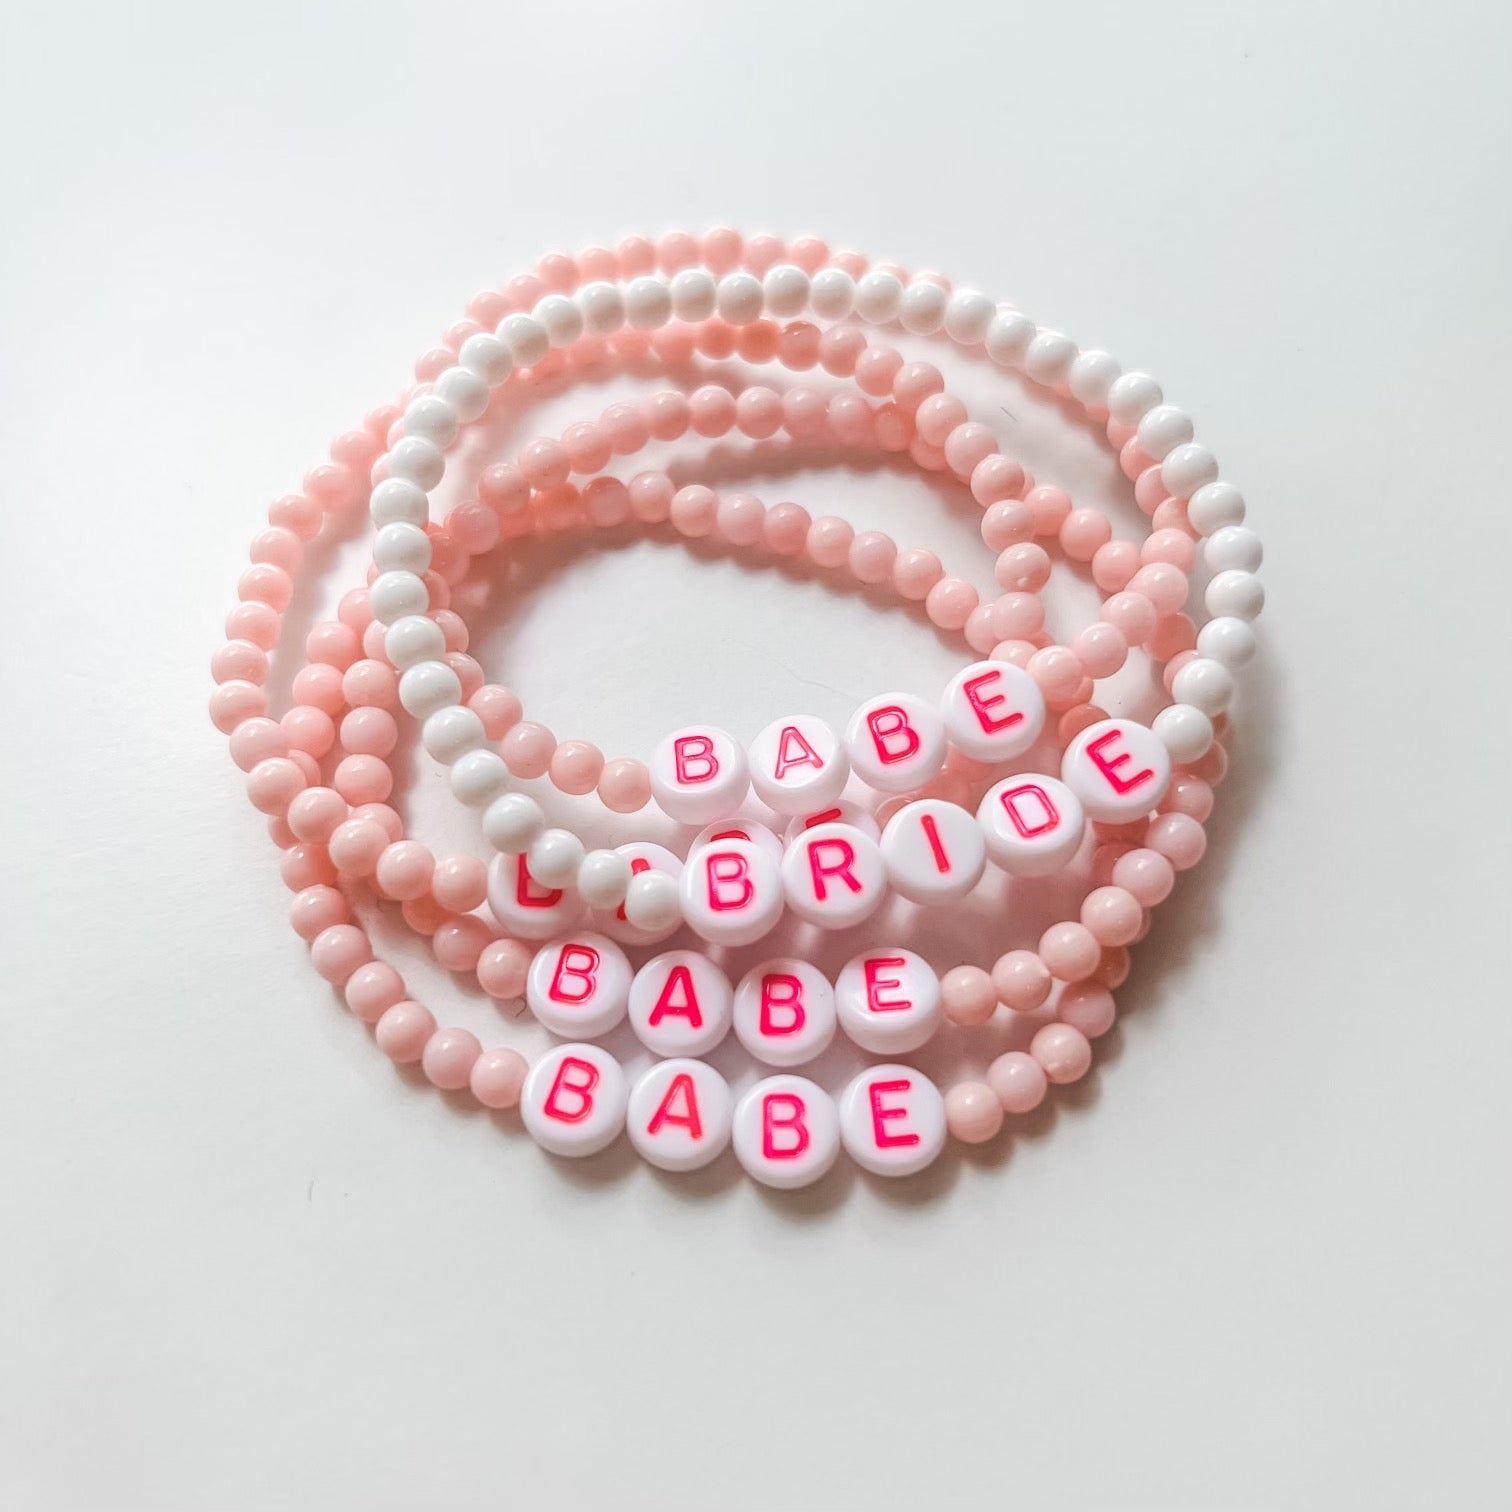 Bachelorette Party Bracelet Team Bride To Be Tribe Hand Band Head Rope  Saiki K Hair Clips Hen Night Wedding Decor Supplies From Cat11cat, $13.17 |  DHgate.Com